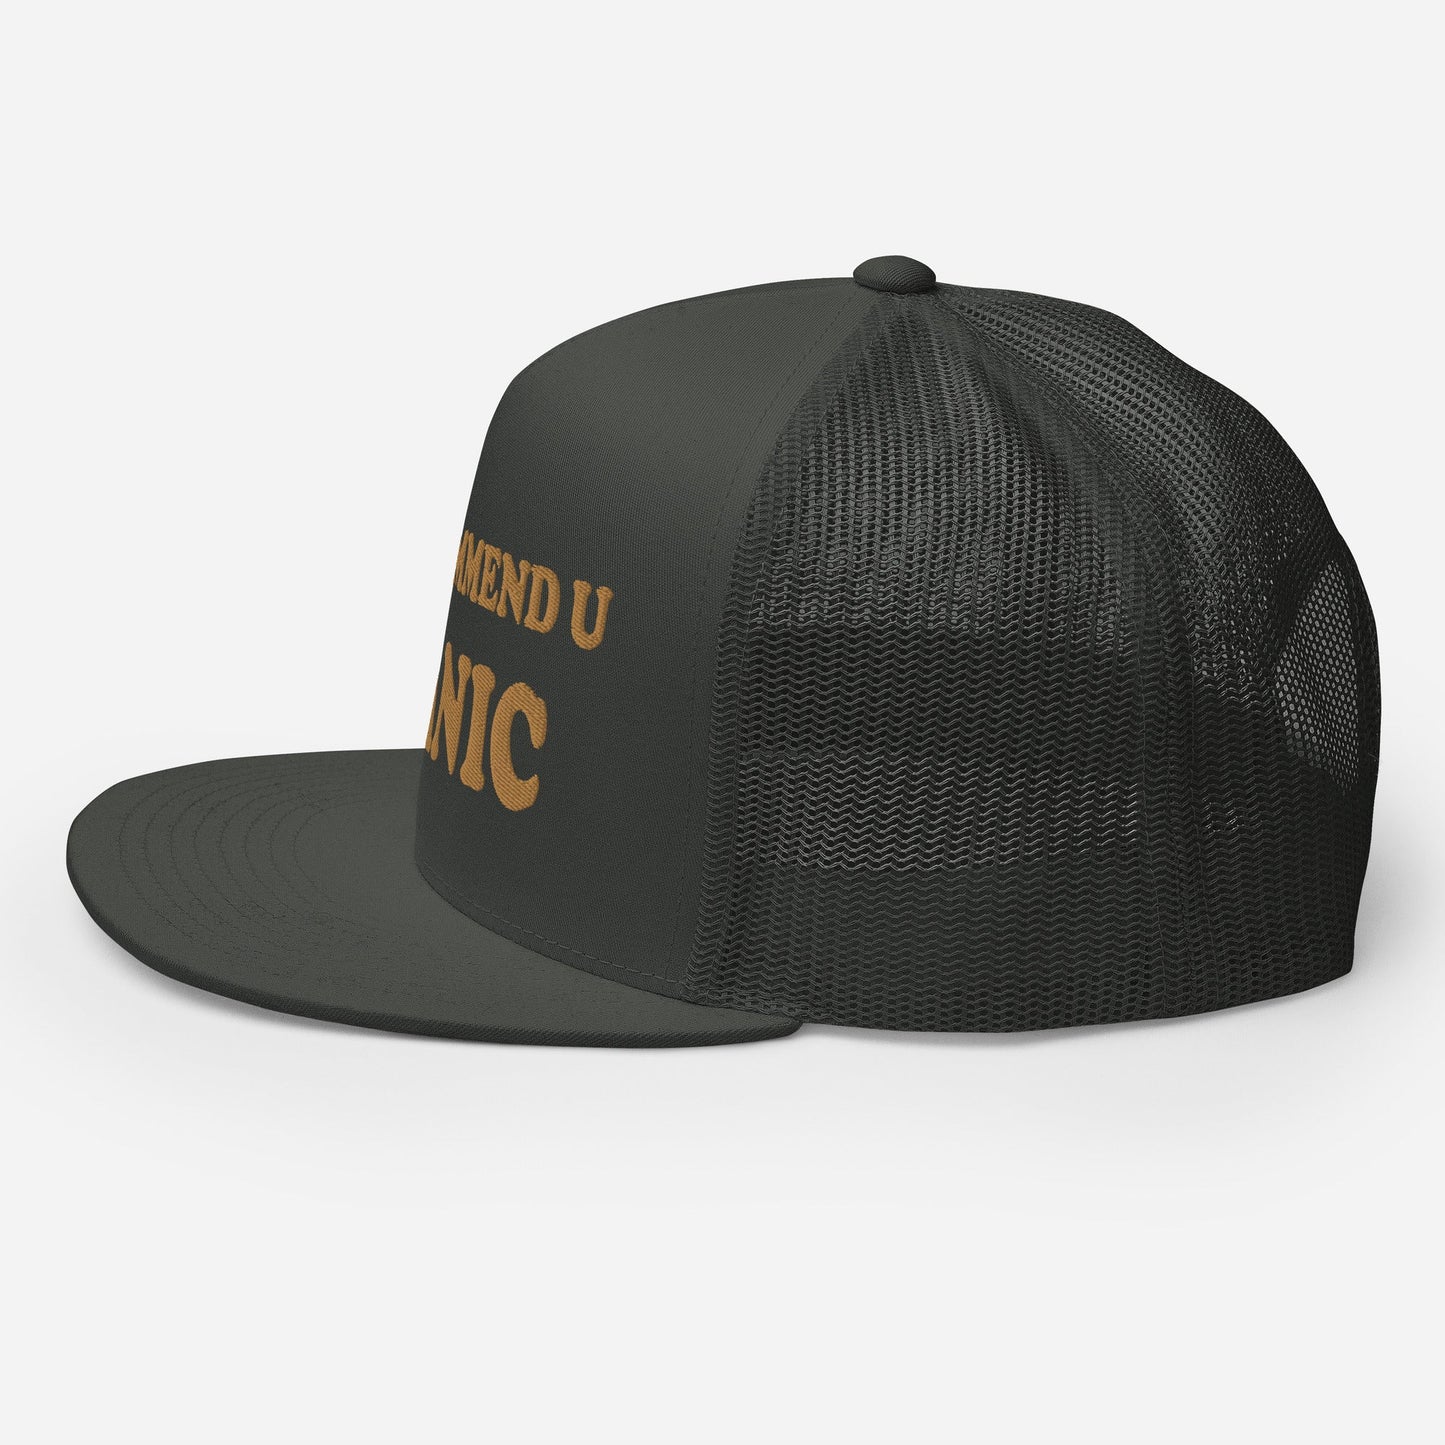 I Would Recommend You Panic Logo-Embroidered and Mesh Trucker Cap